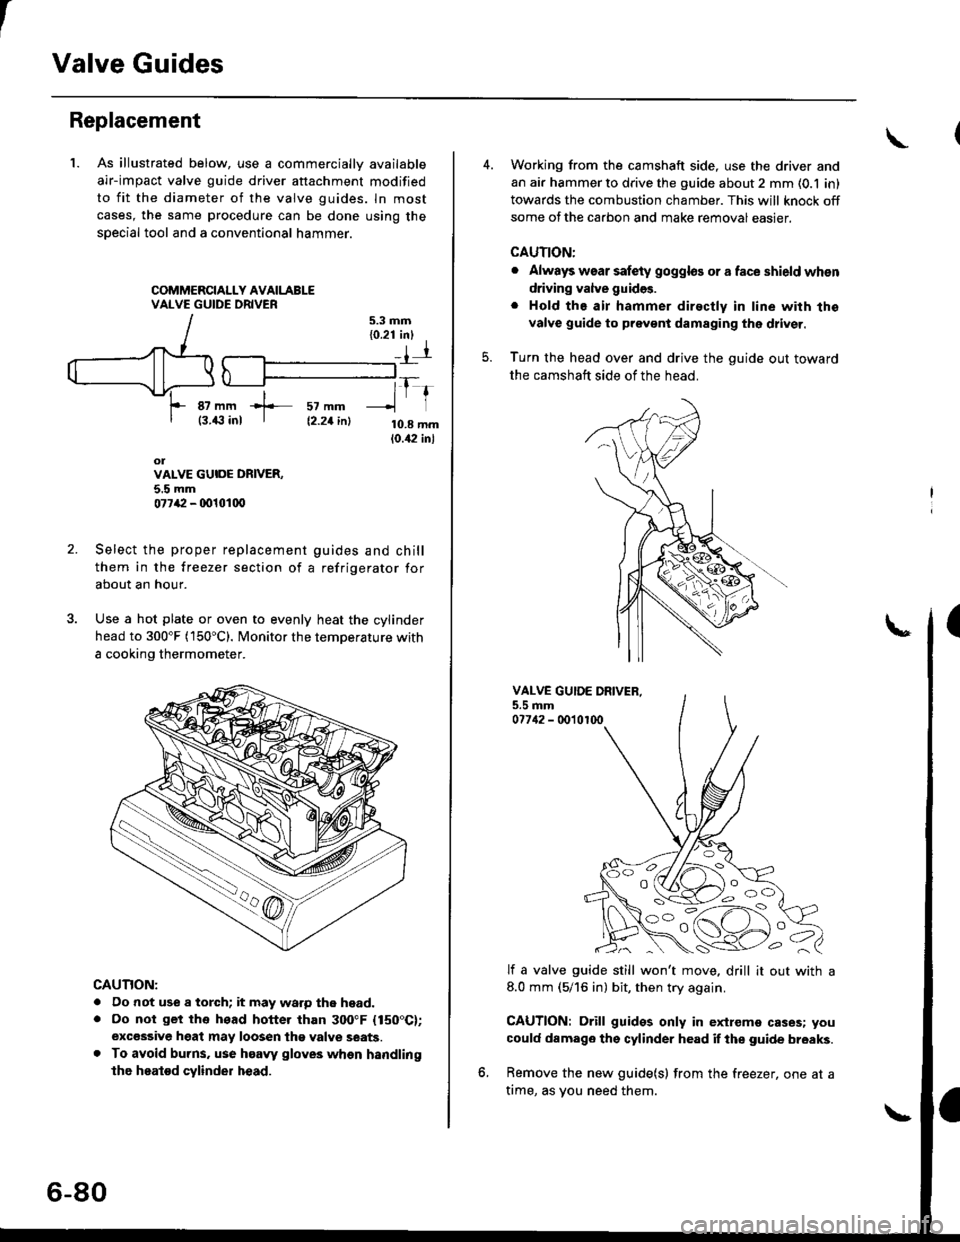 HONDA CIVIC 1996 6.G Service Manual t
Valve Guides
Replacement
1. As illustrated below, use a commerciallv available
air-impact valve guide driver attachment modified
to fit the diameter of the valve guides. ln most
cases, the same proc